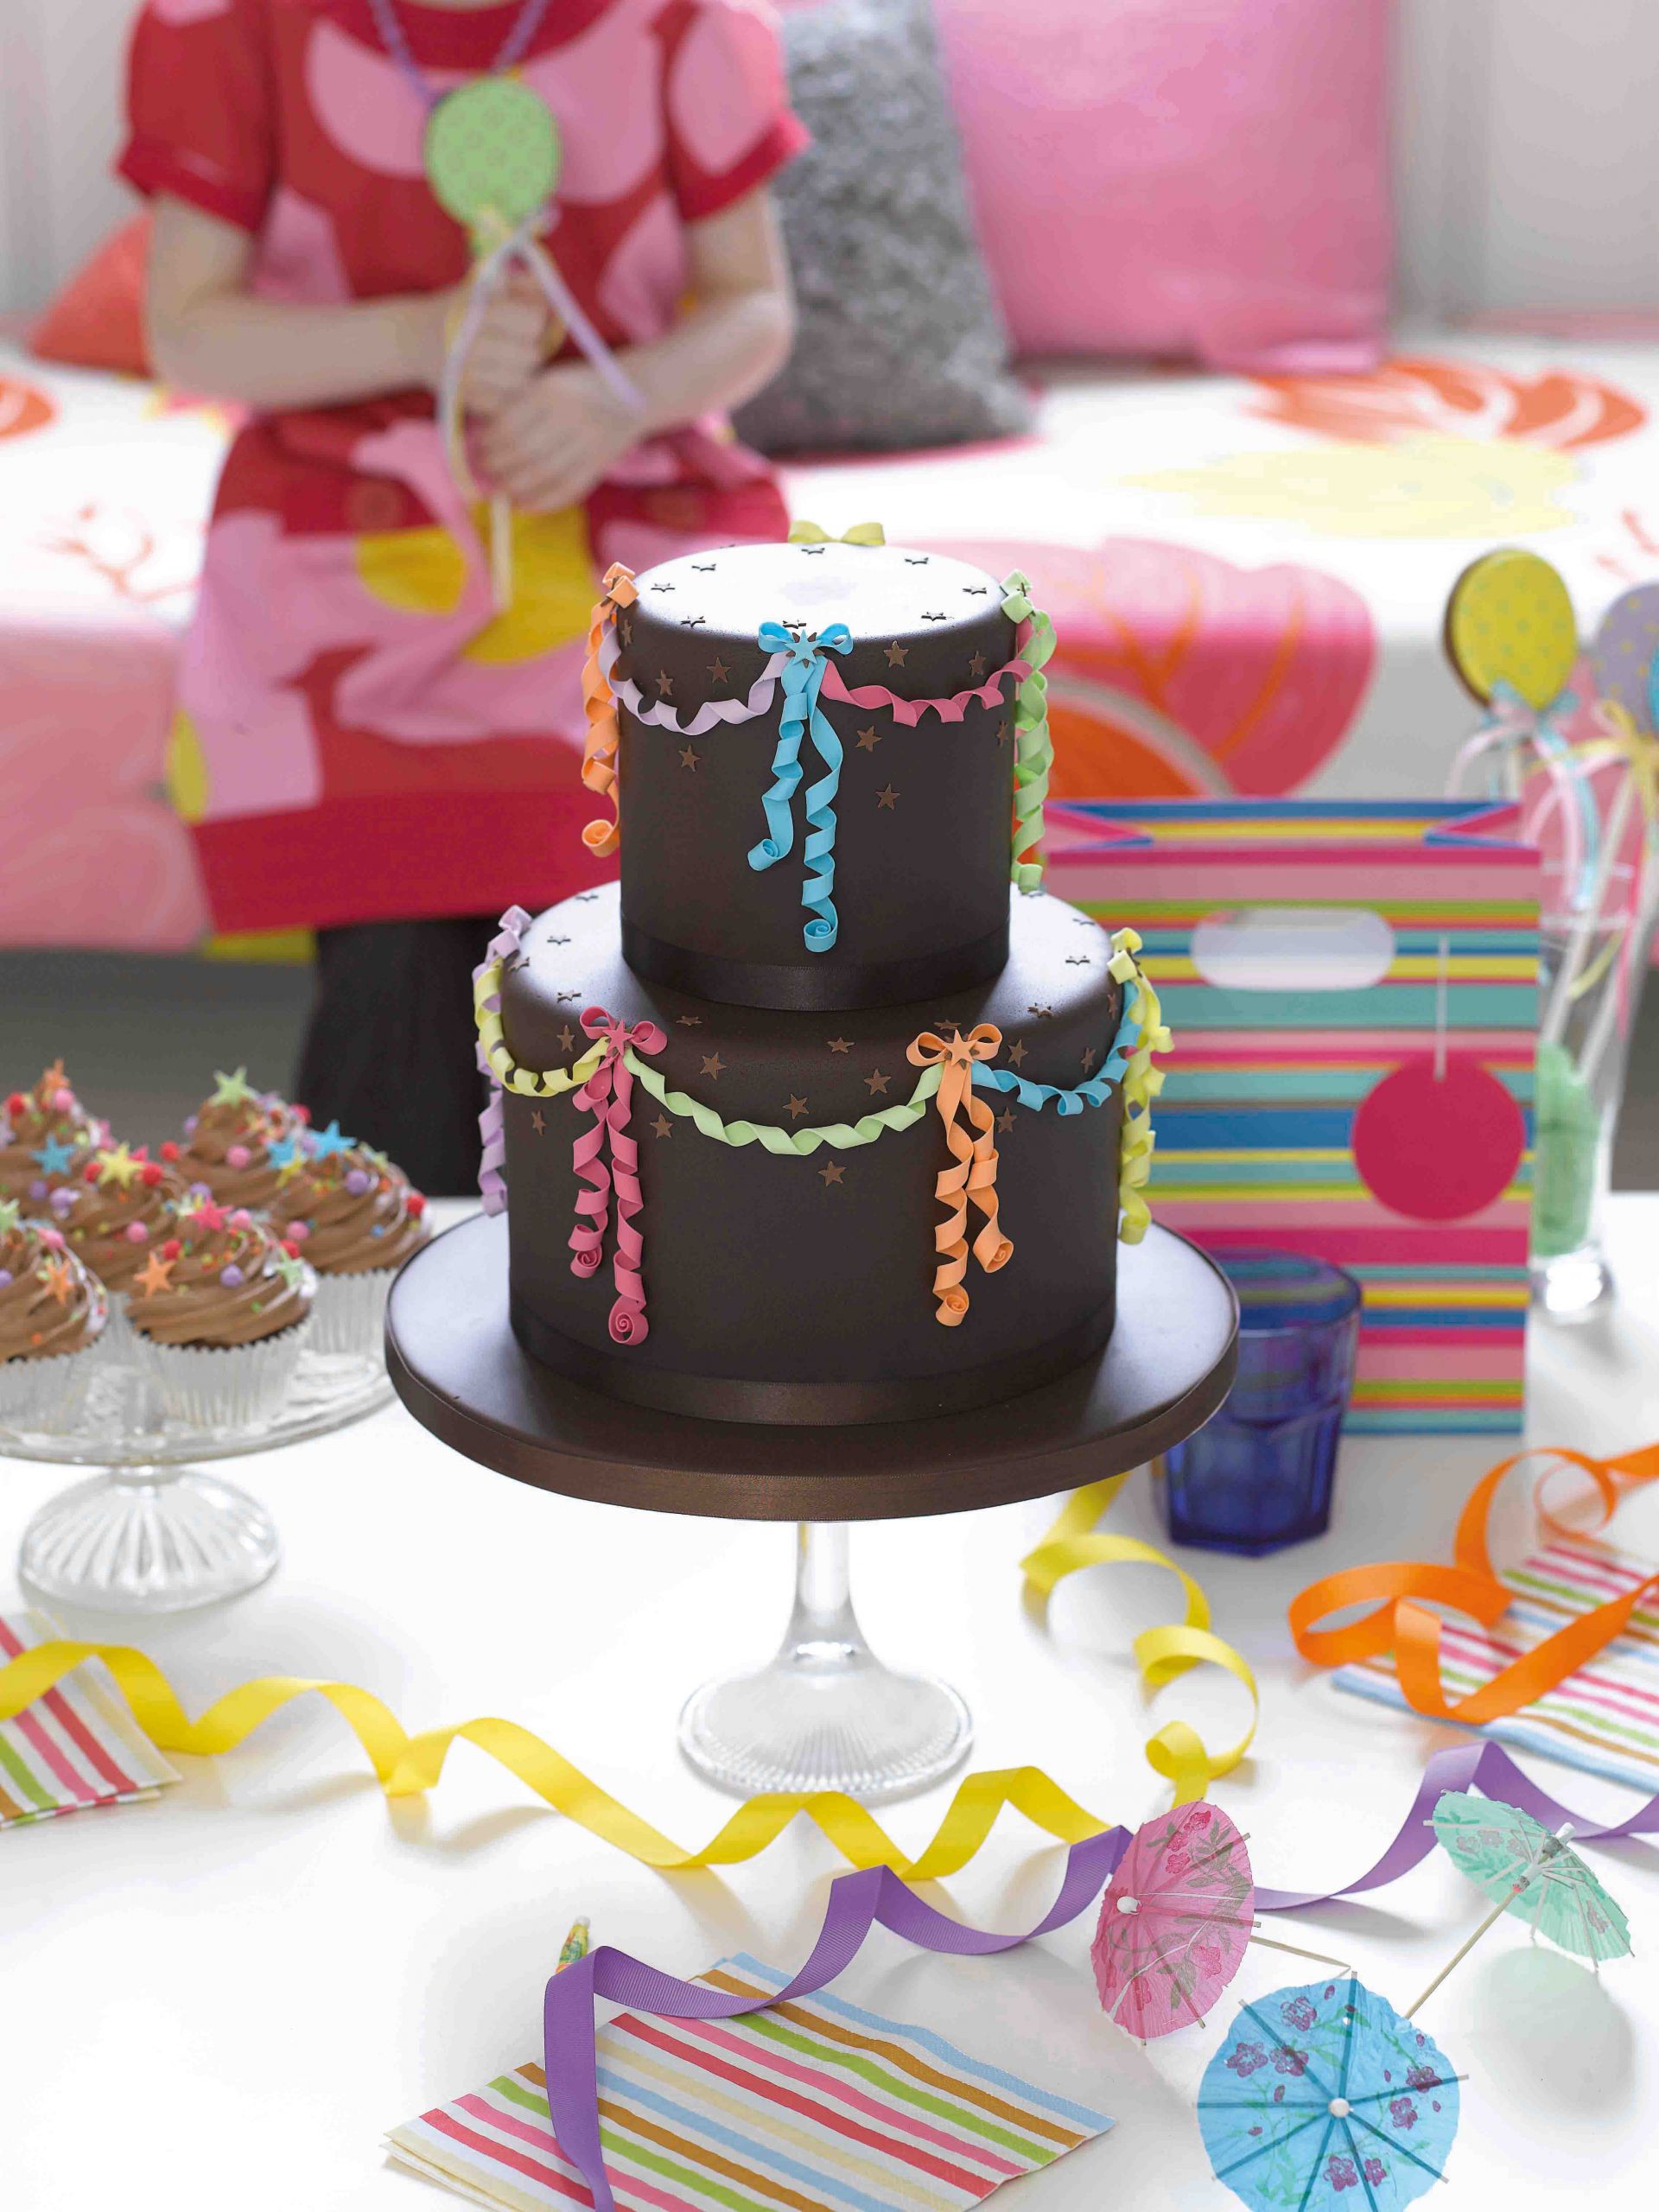 A Picture Of A Birthday Cake
 Celebration Cakes Birthday Cakes Novelty Cakes